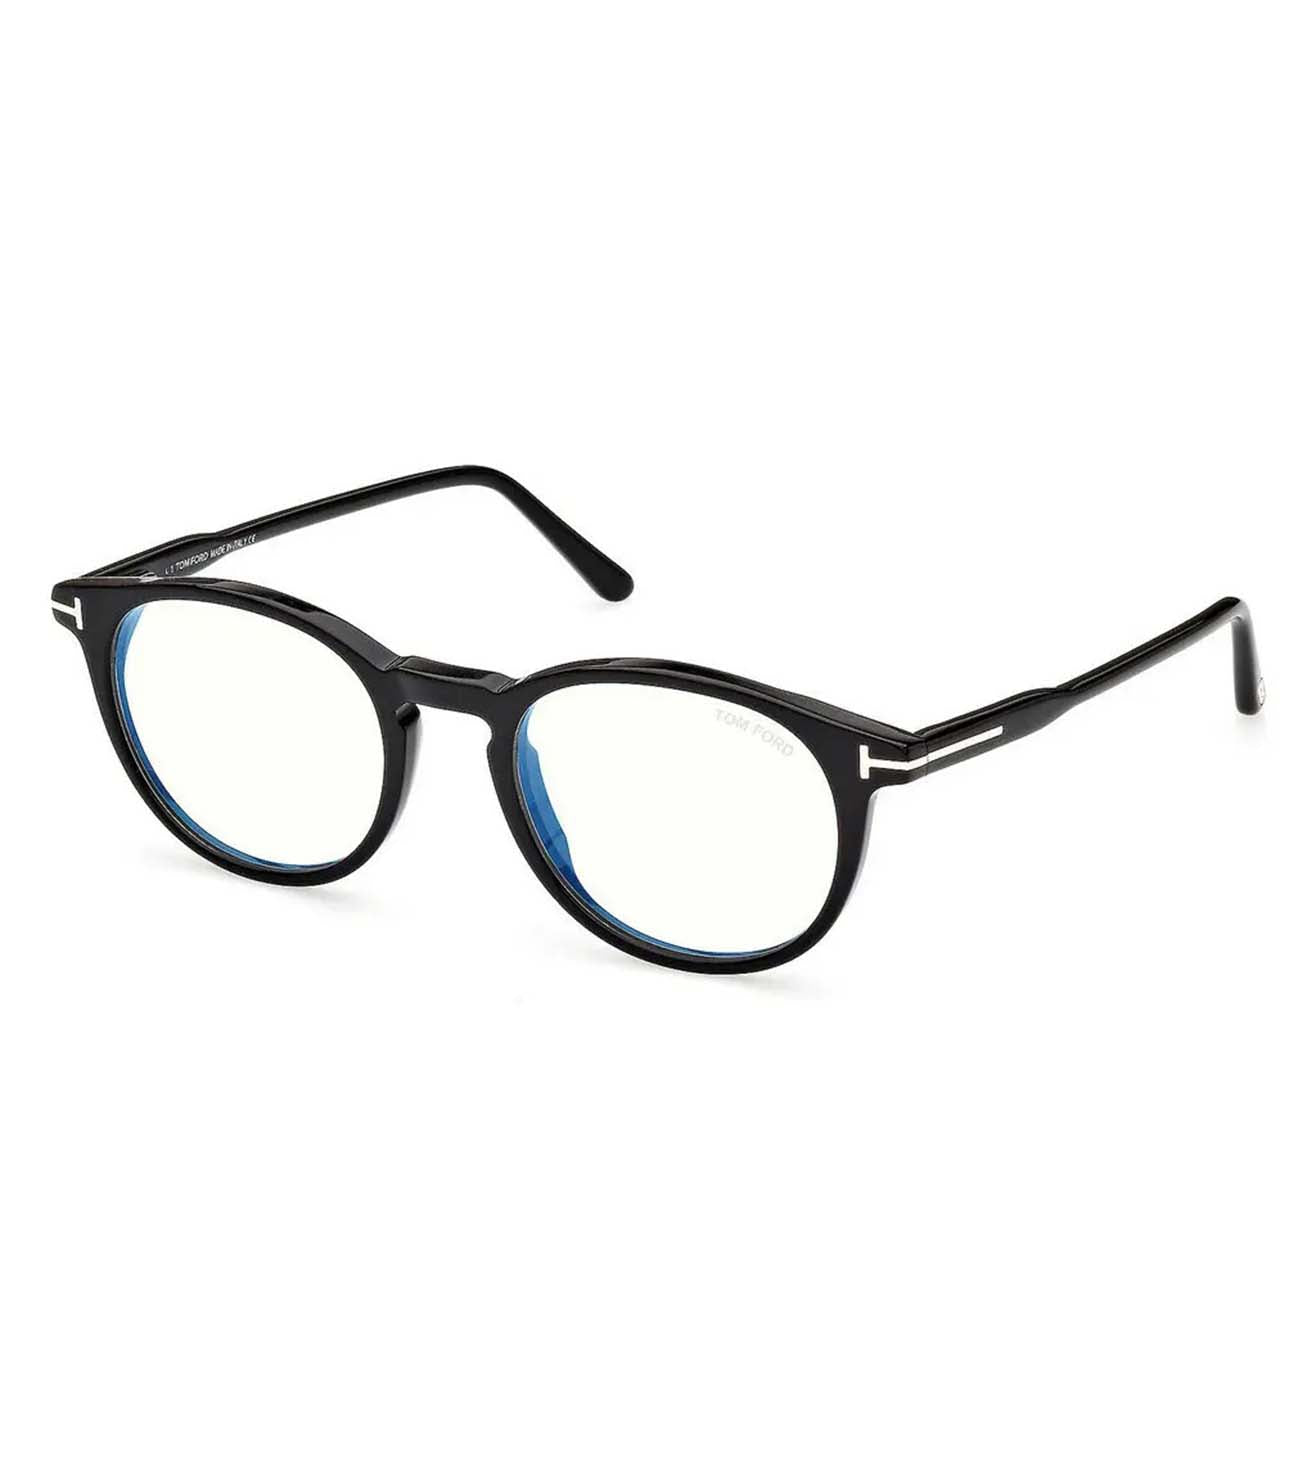 Tom Ford Men's Black Round Optical Frame with Grey Clip-on Sunglasses